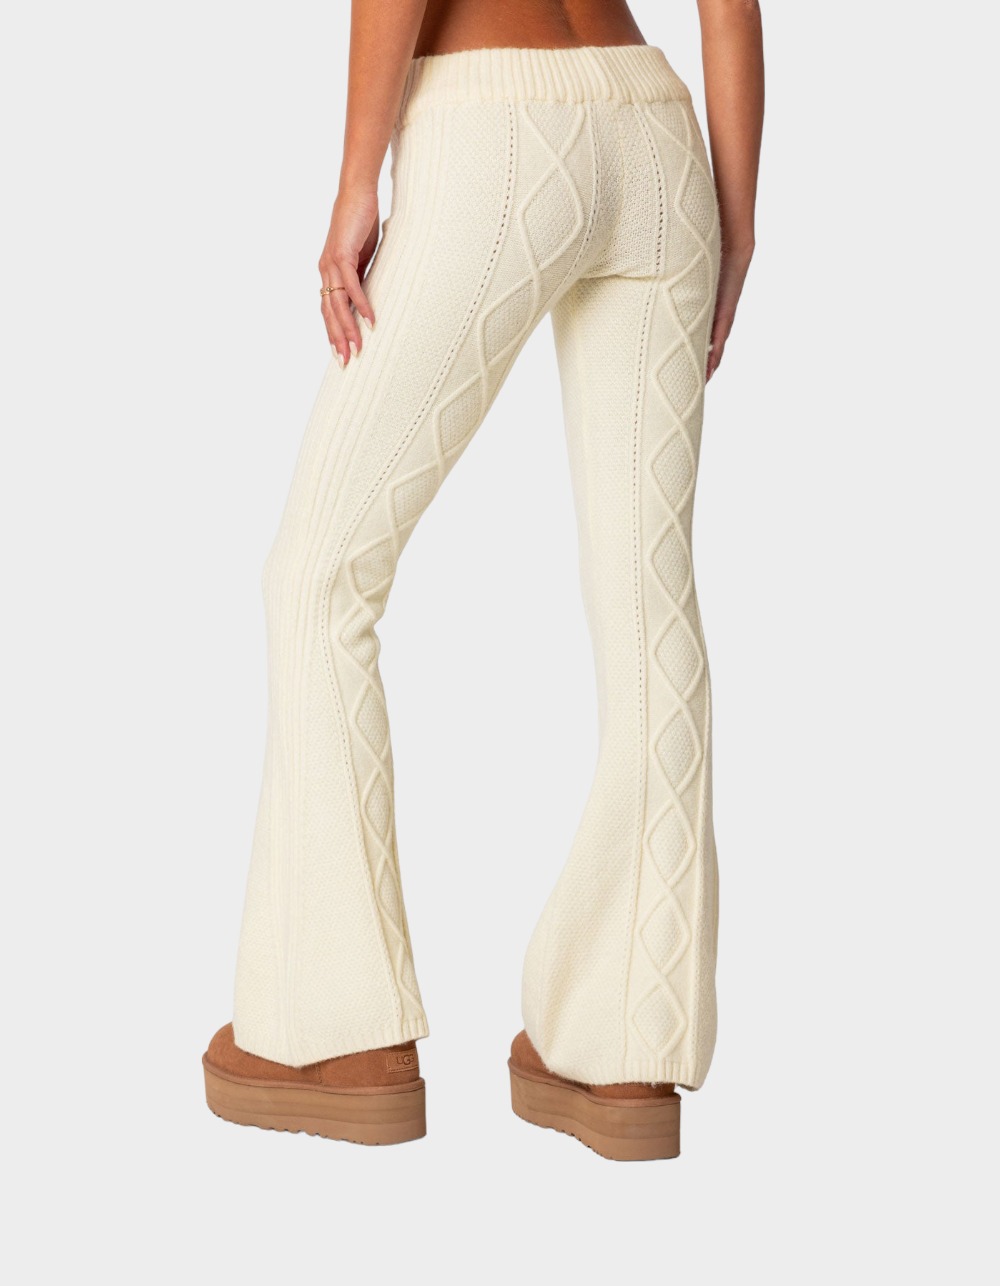 Edikted Women's Ray cable knit flared pants - Macy's